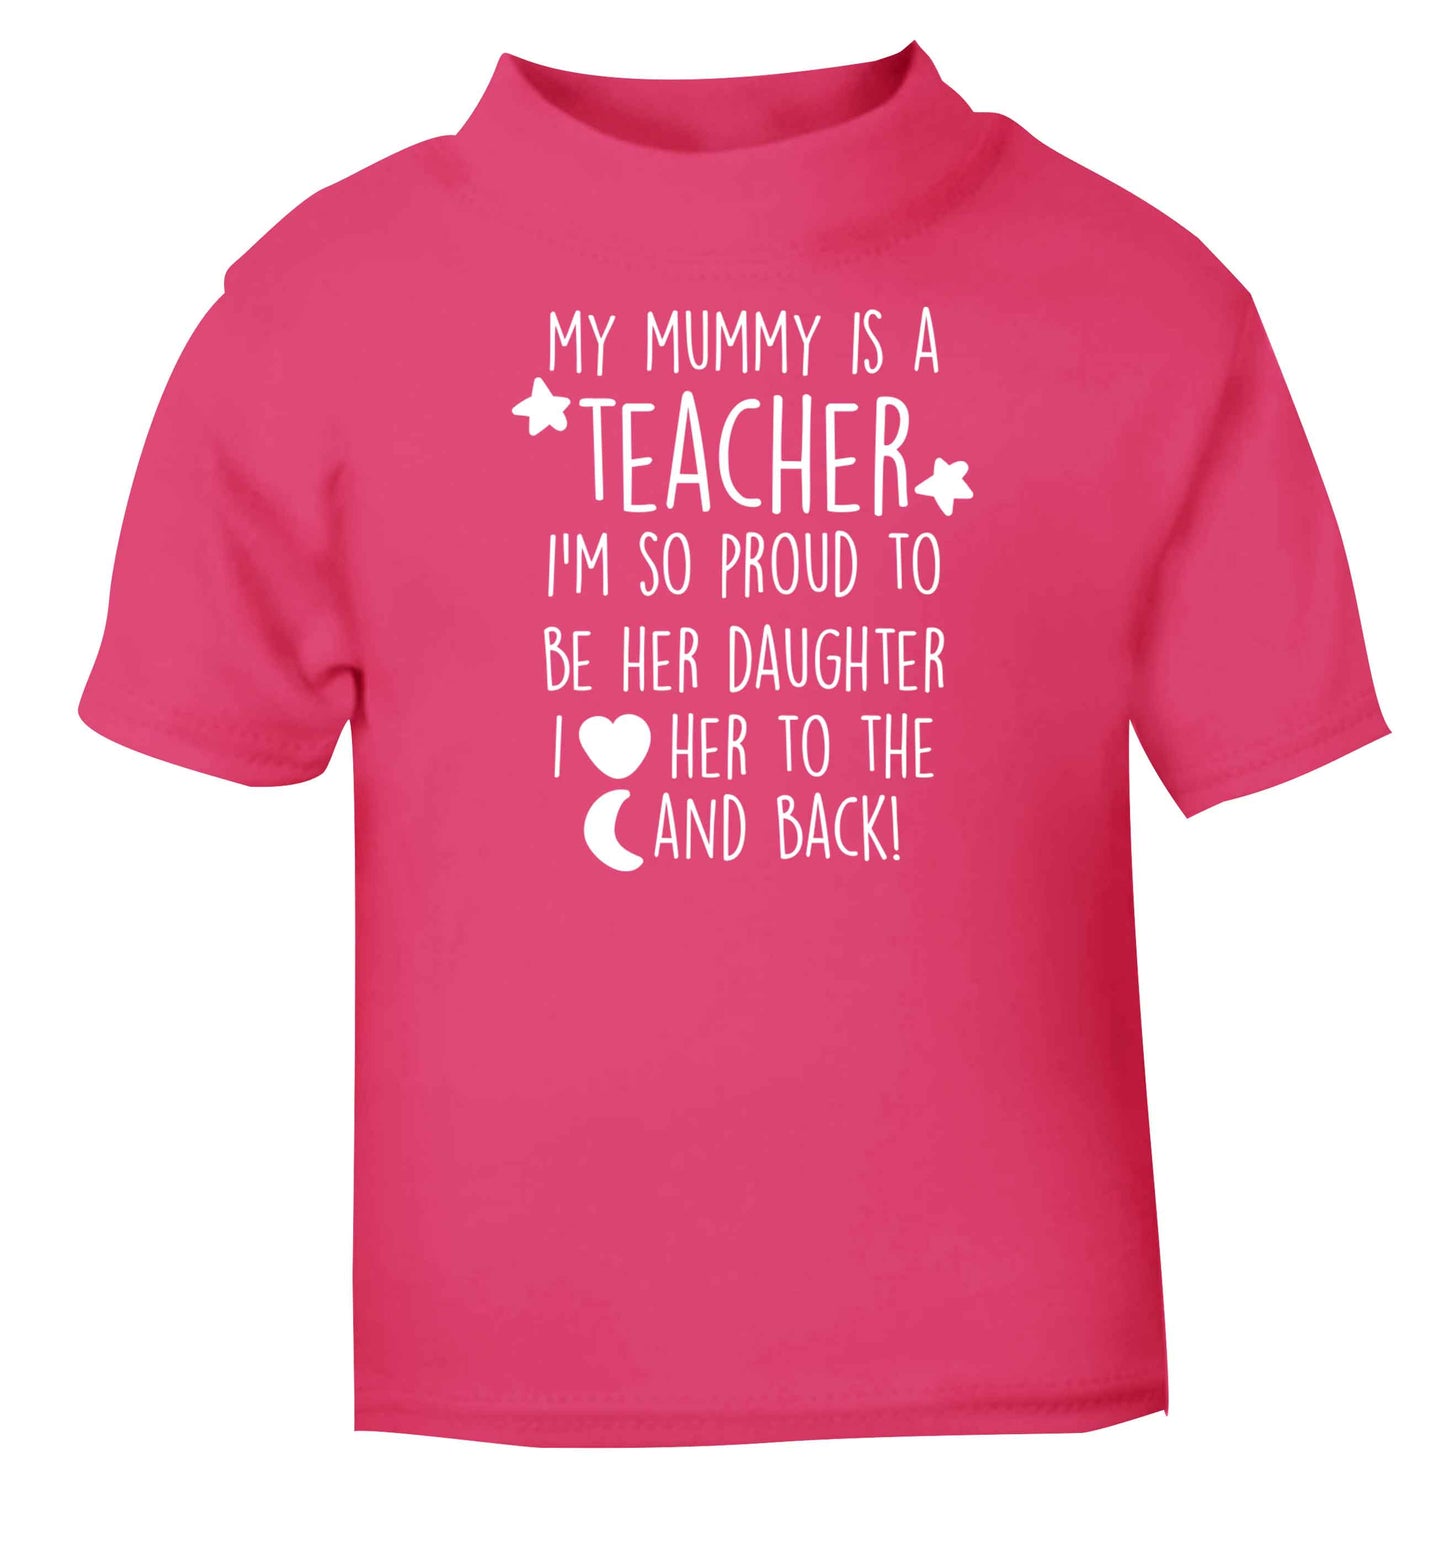 My mummy is a teacher I'm so proud to be her daughter I love her to the moon and back pink baby toddler Tshirt 2 Years